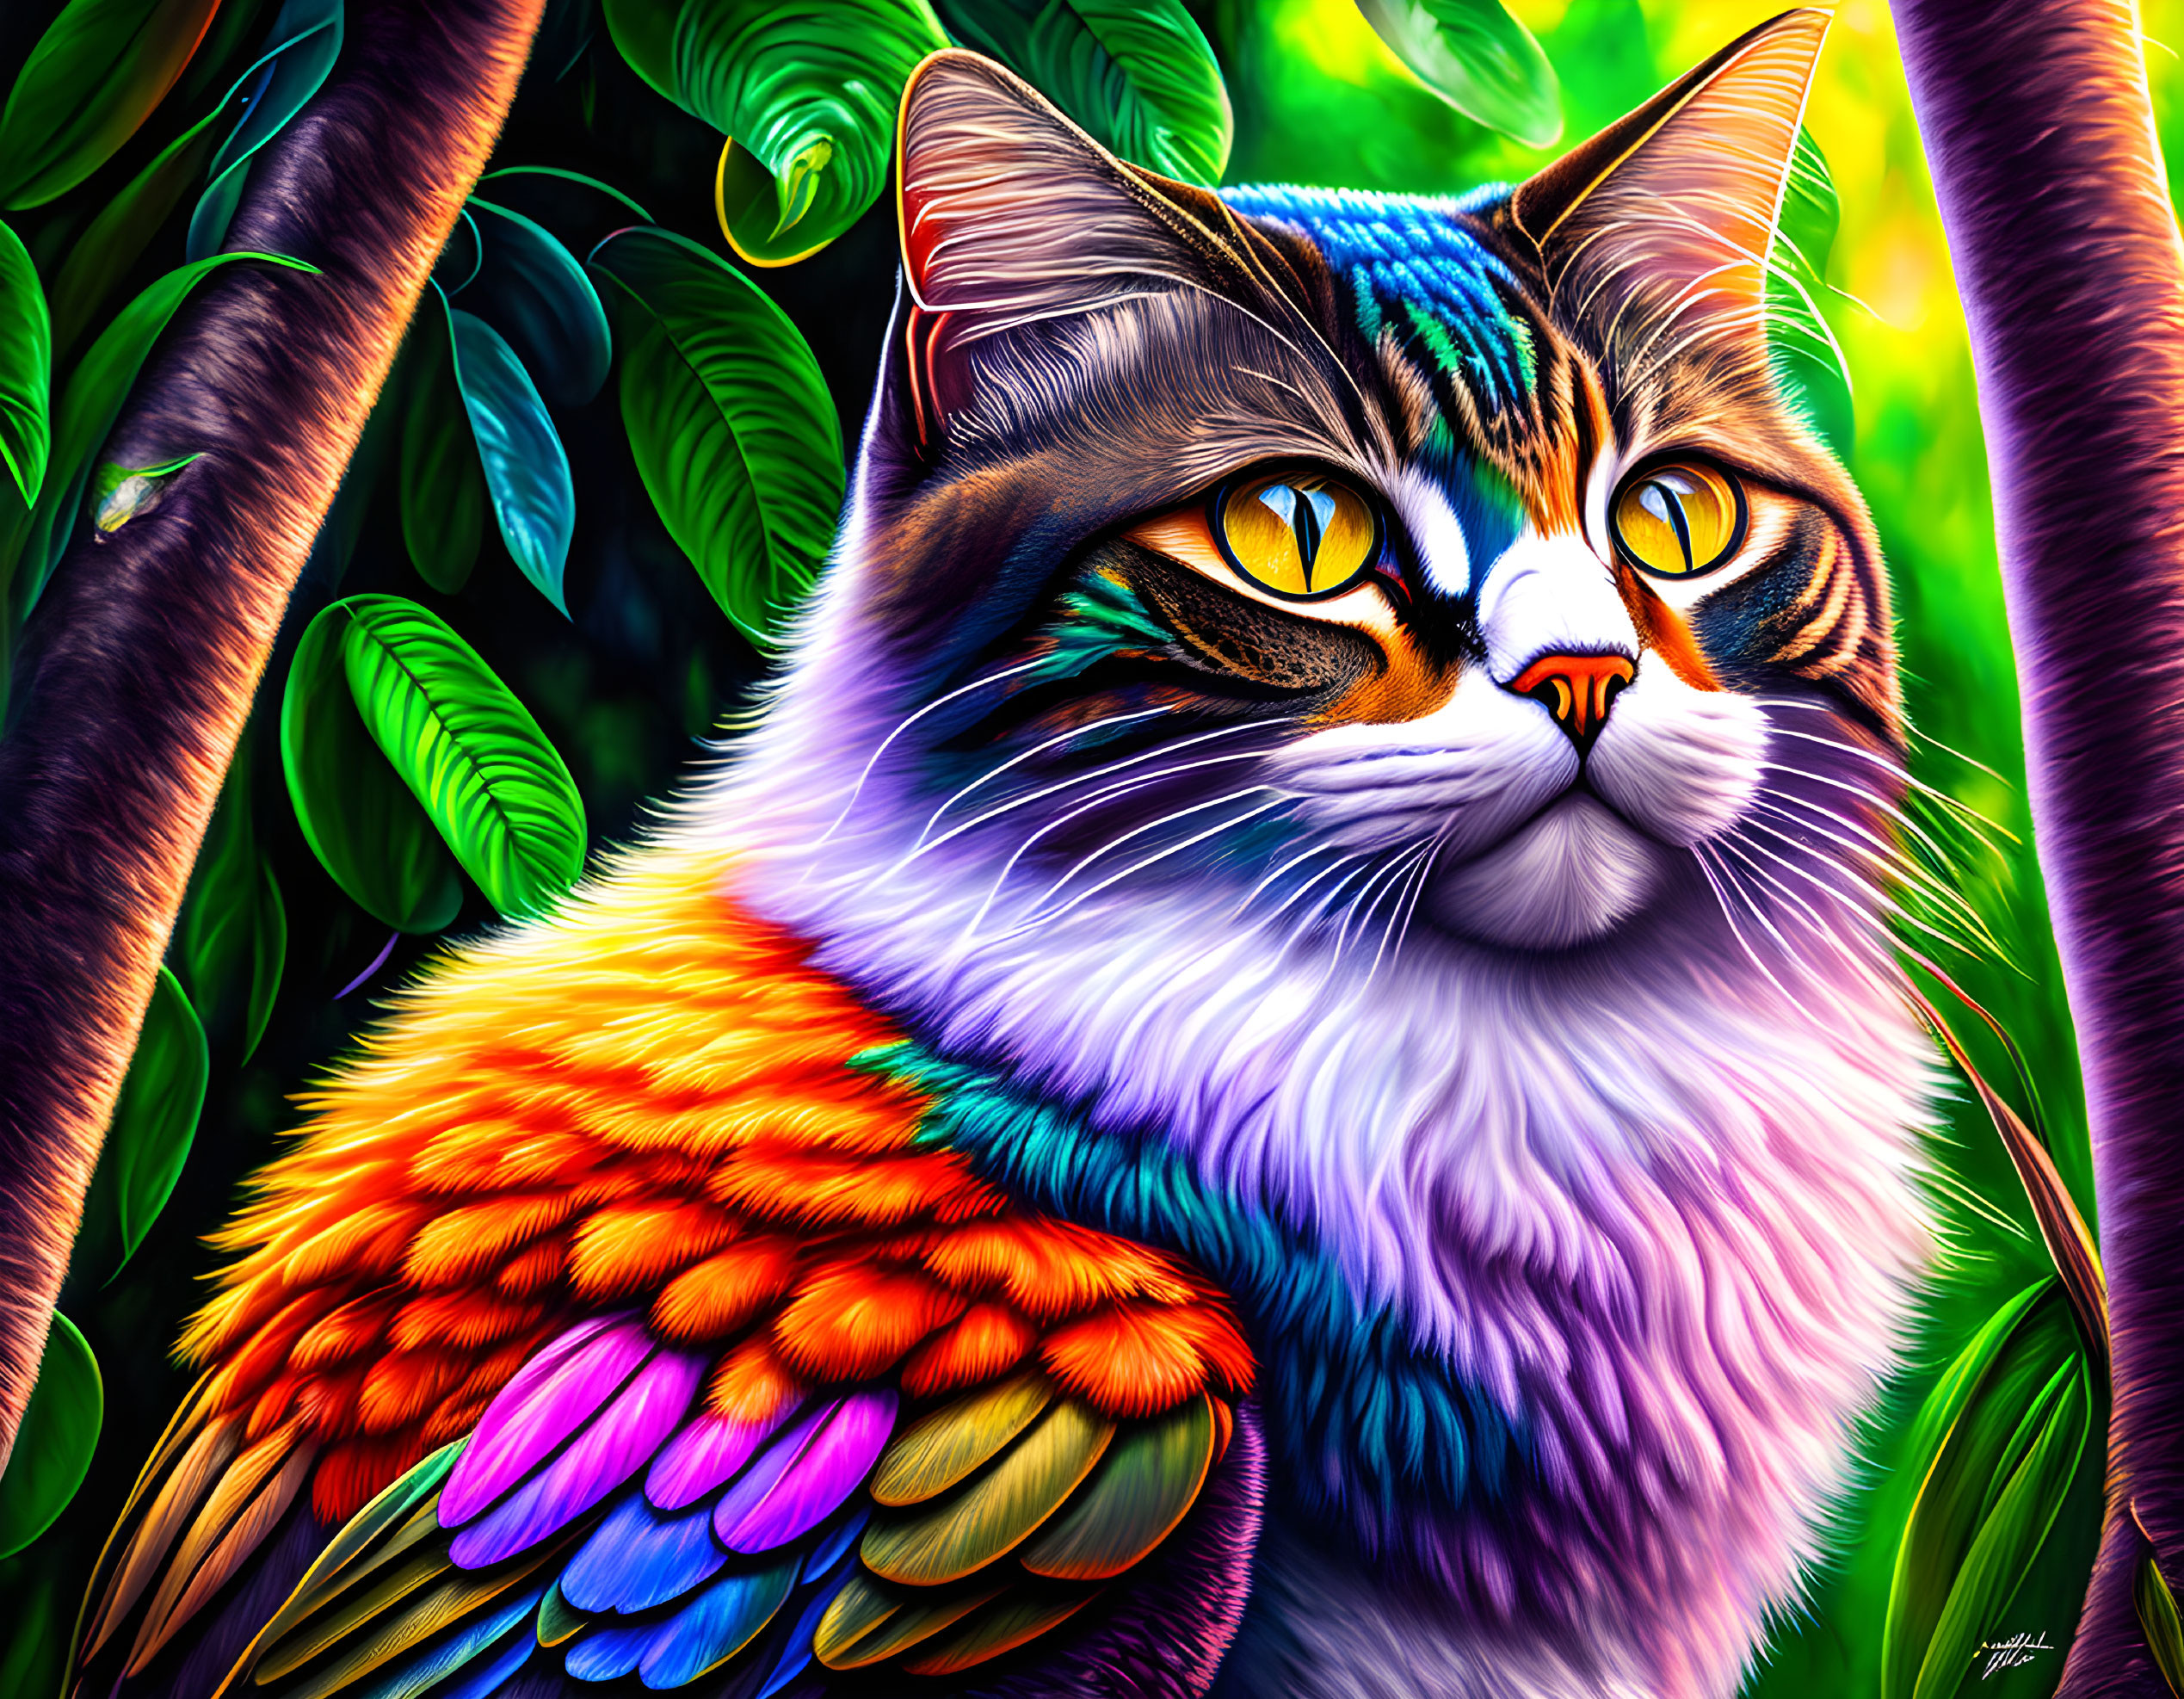 Colorful Cat with Bird-Like Wings in Lush Jungle Setting